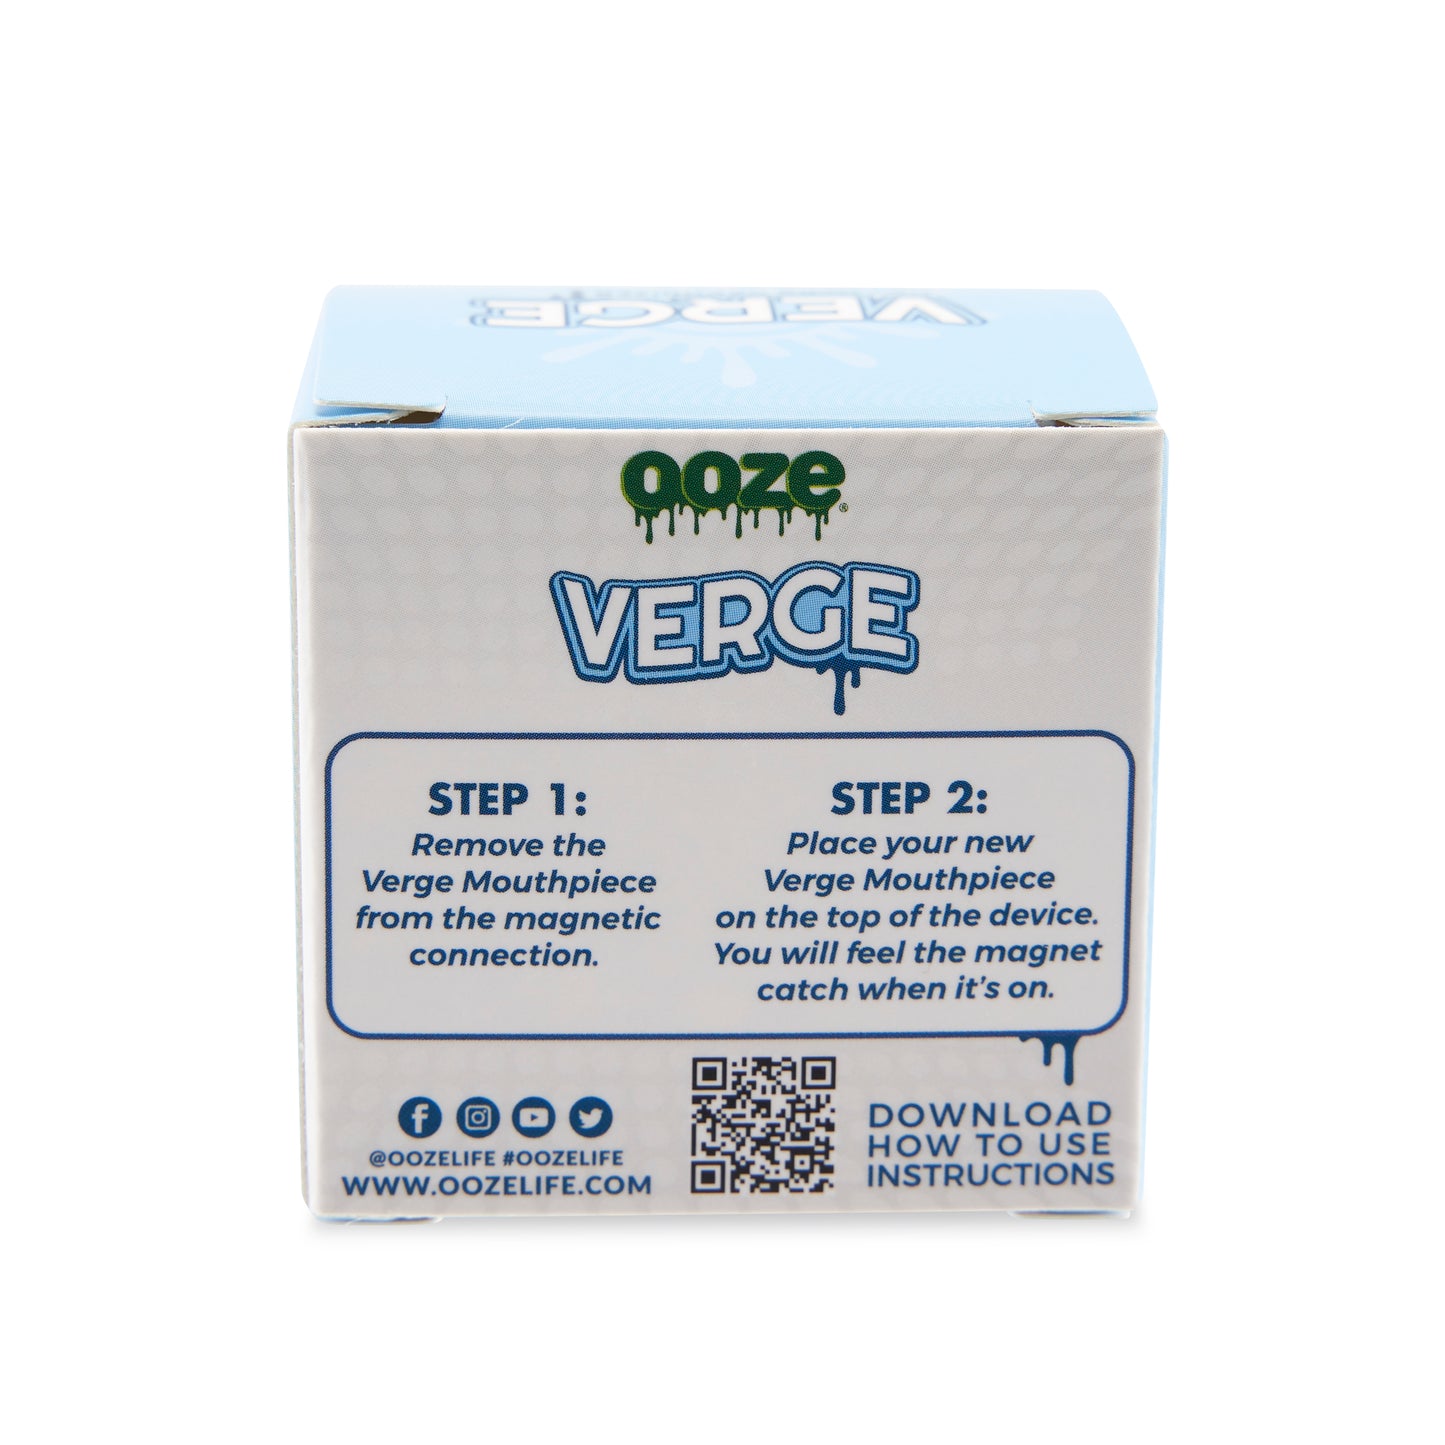 The back of the packaging for the replacement Ooze Verge magnetic mouthpiece.